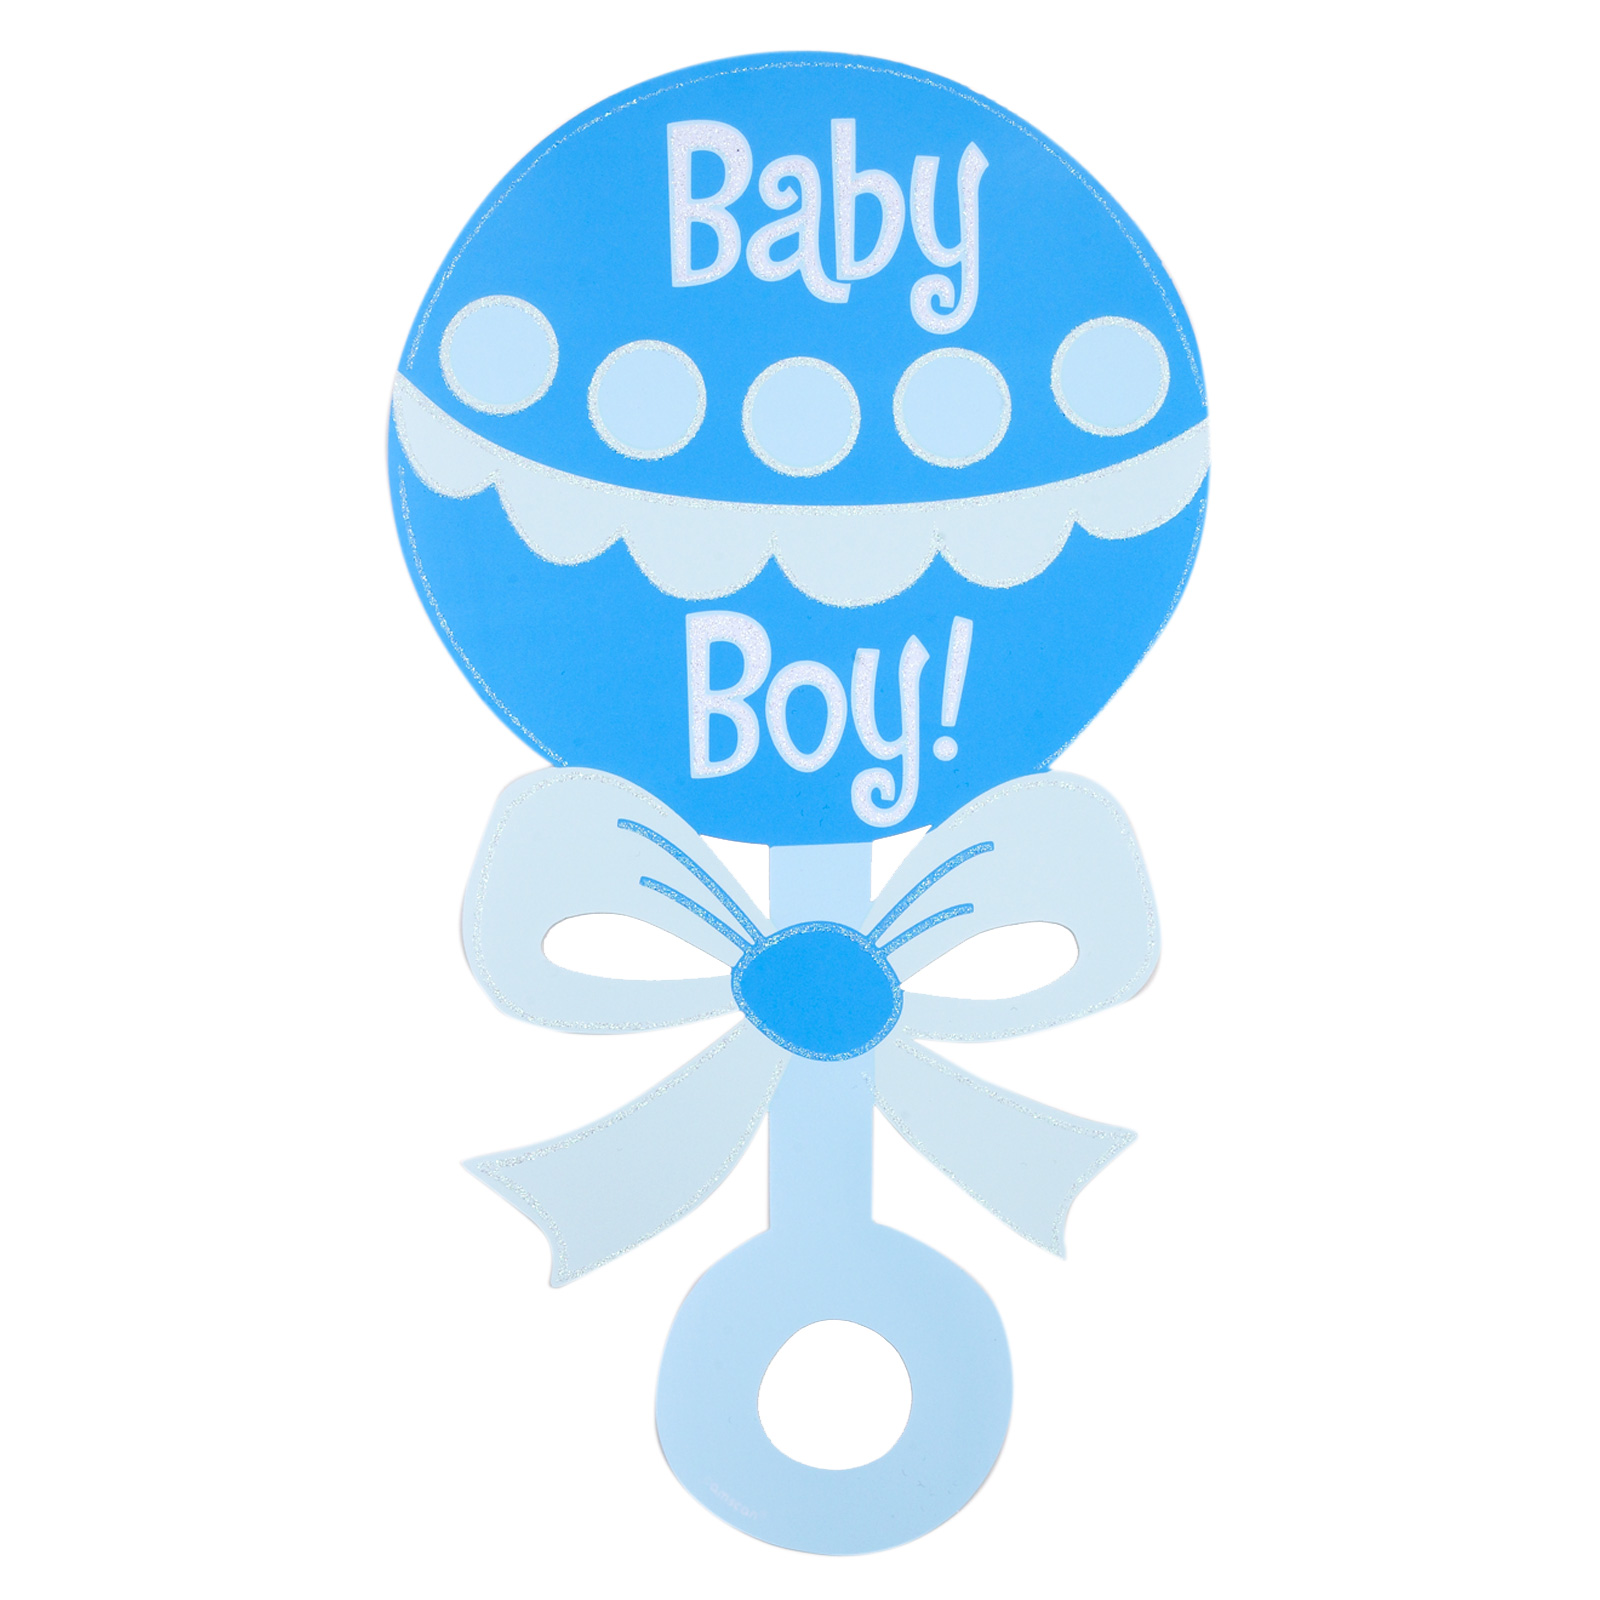 Baby Boy Clipart & Baby Boy Clip Art Images.